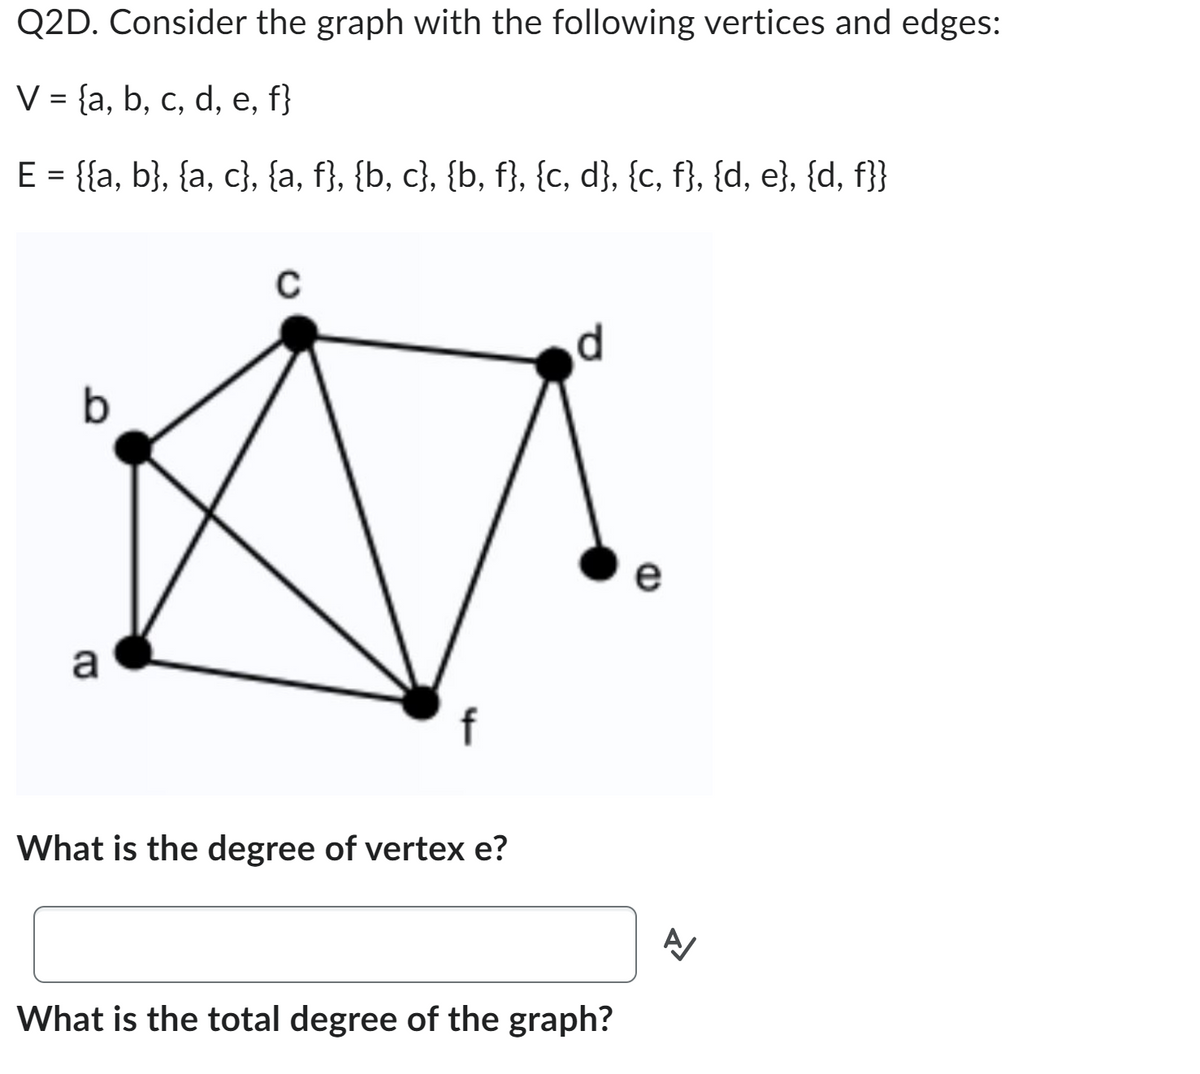 Q2D. Consider the graph with the following vertices and edges:
V = {a, b, c, d, e, f}
E = {{a, b}, {a, c}, {a, f}, {b, c}, {b, f}, {c, d}, {c, f}, {d, e}, {d, f}}
b
a
C
f
What is the degree of vertex e?
d
What is the total degree of the graph?
A/